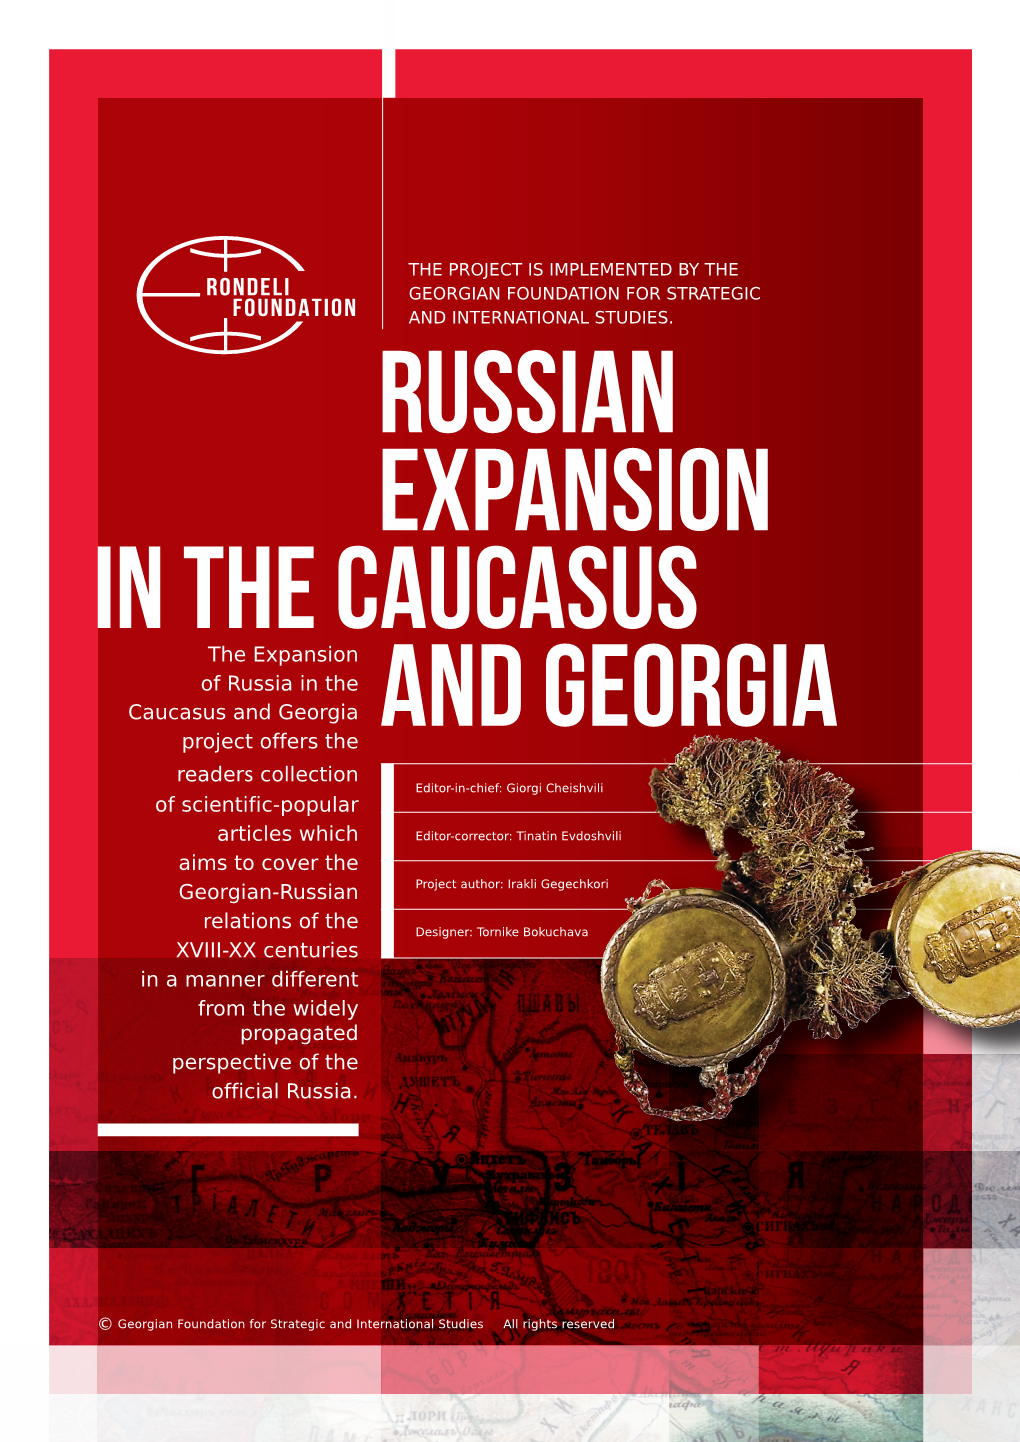 The Expansion of Russia in the Propagated Perspective of The